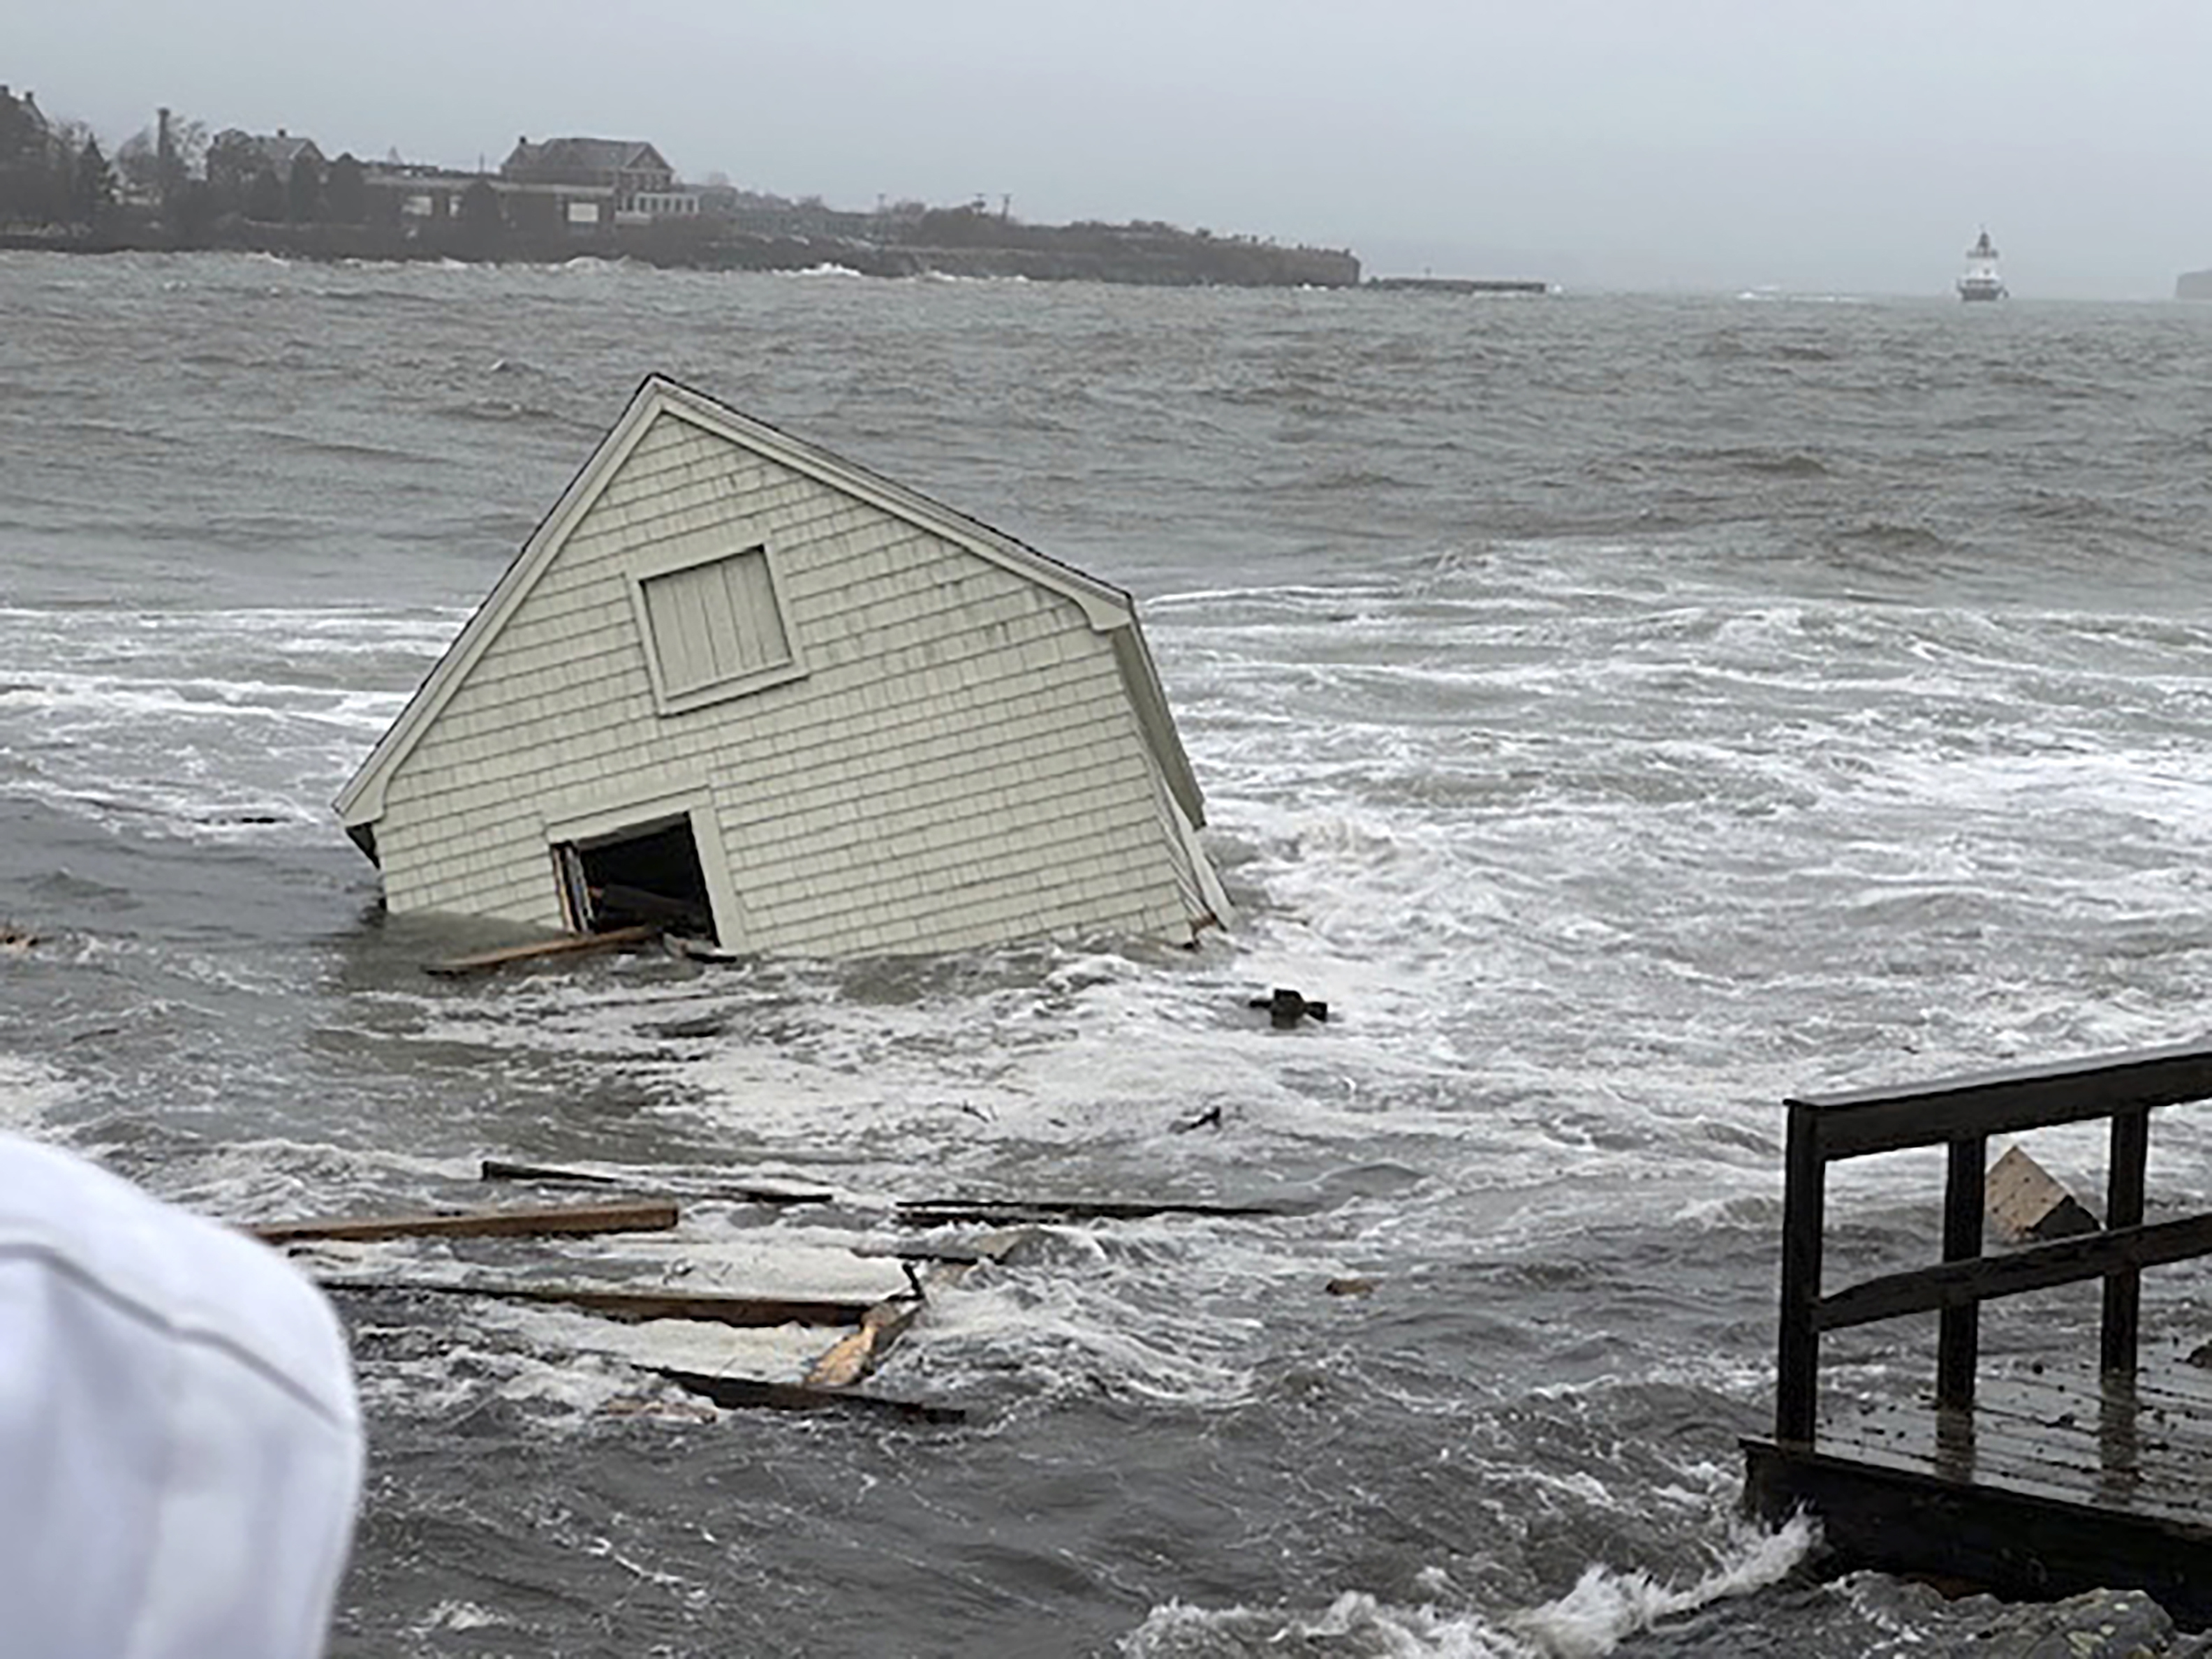 Record high tide in Maine washes away historic, 100-year-old fishing shacks